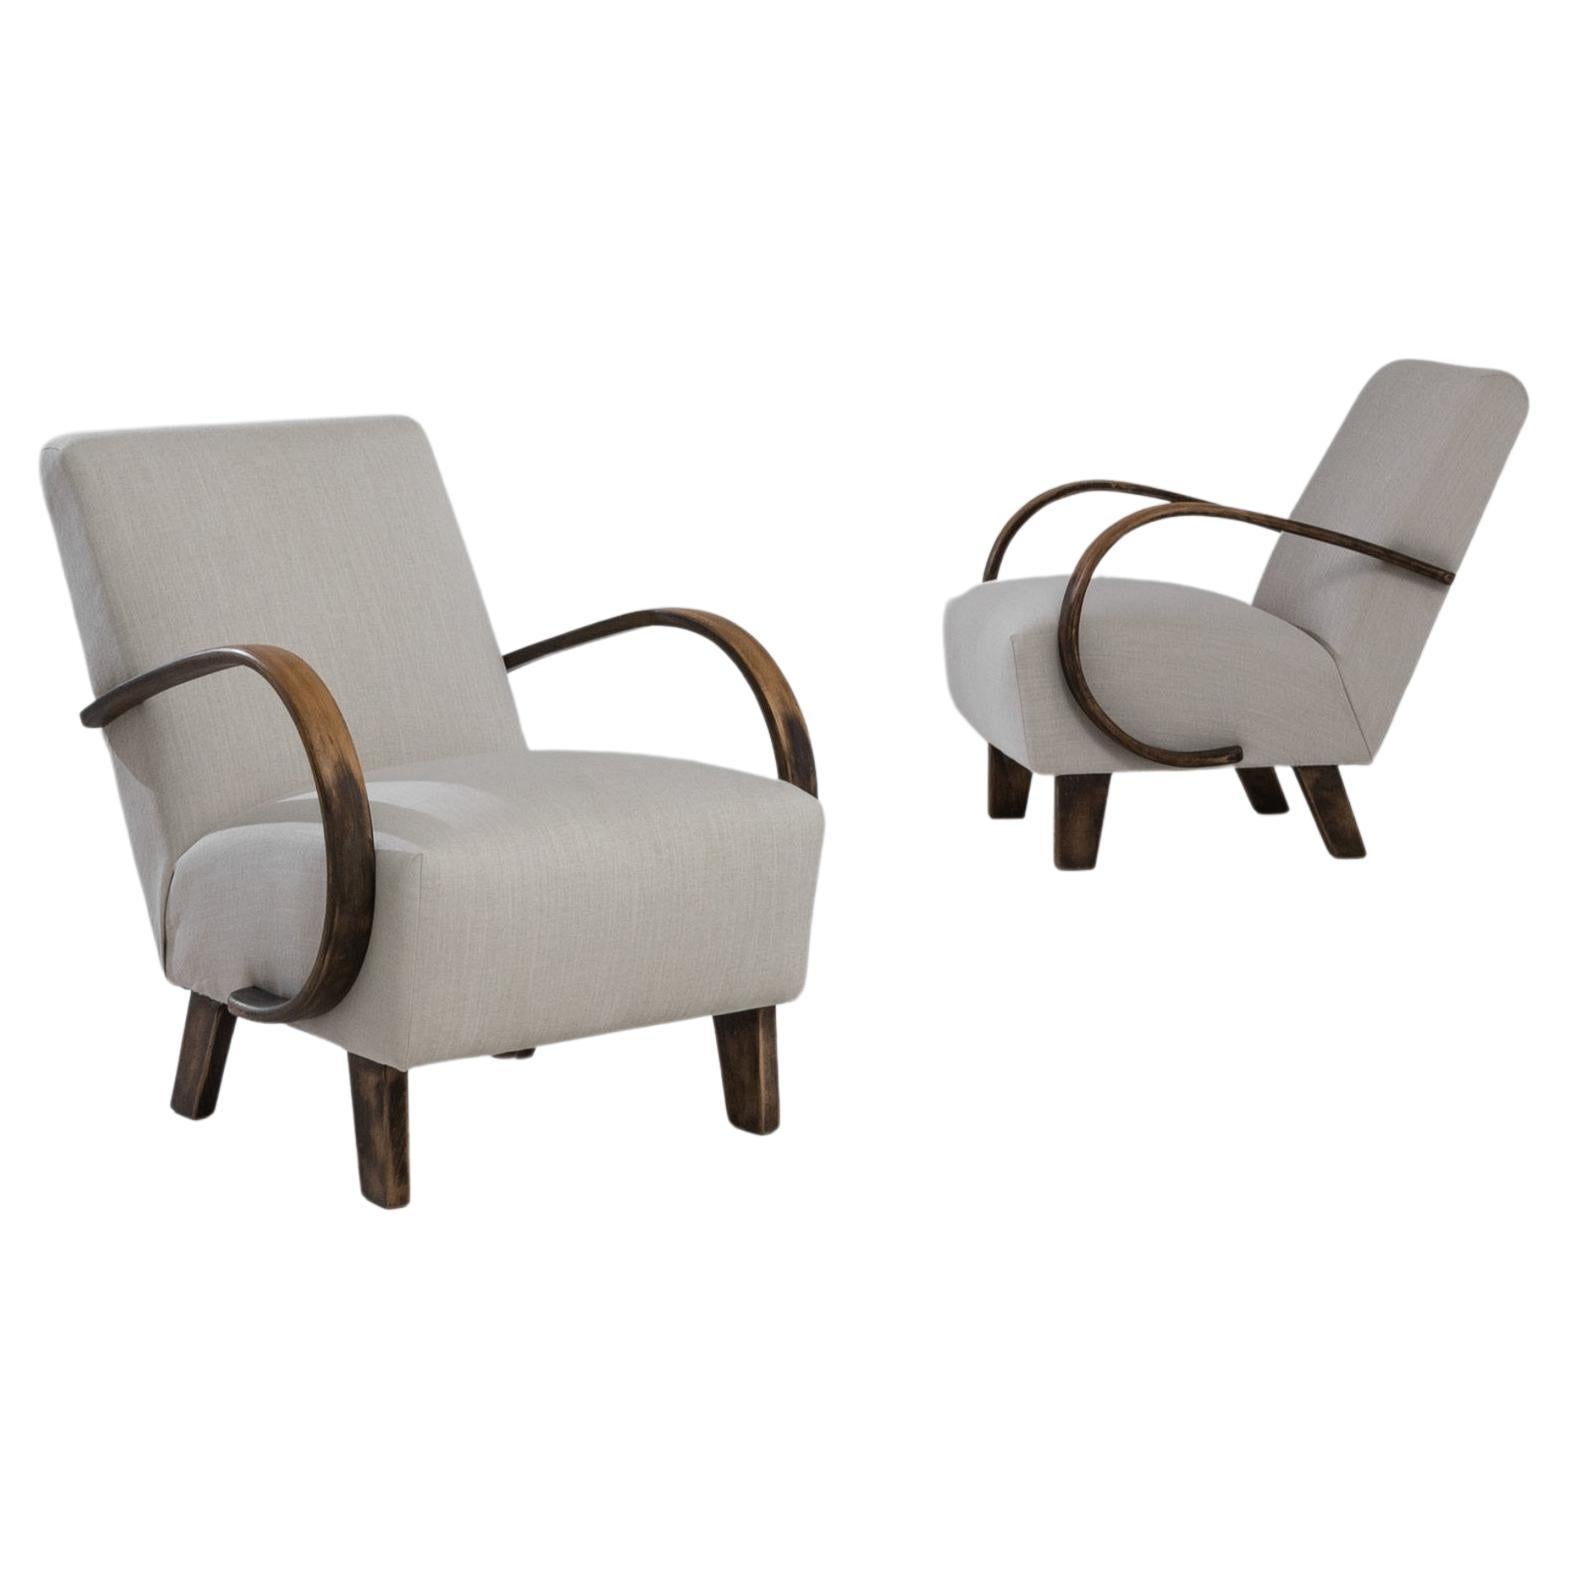 1950s Wooden Armchairs by J. Halabala, a Pair For Sale